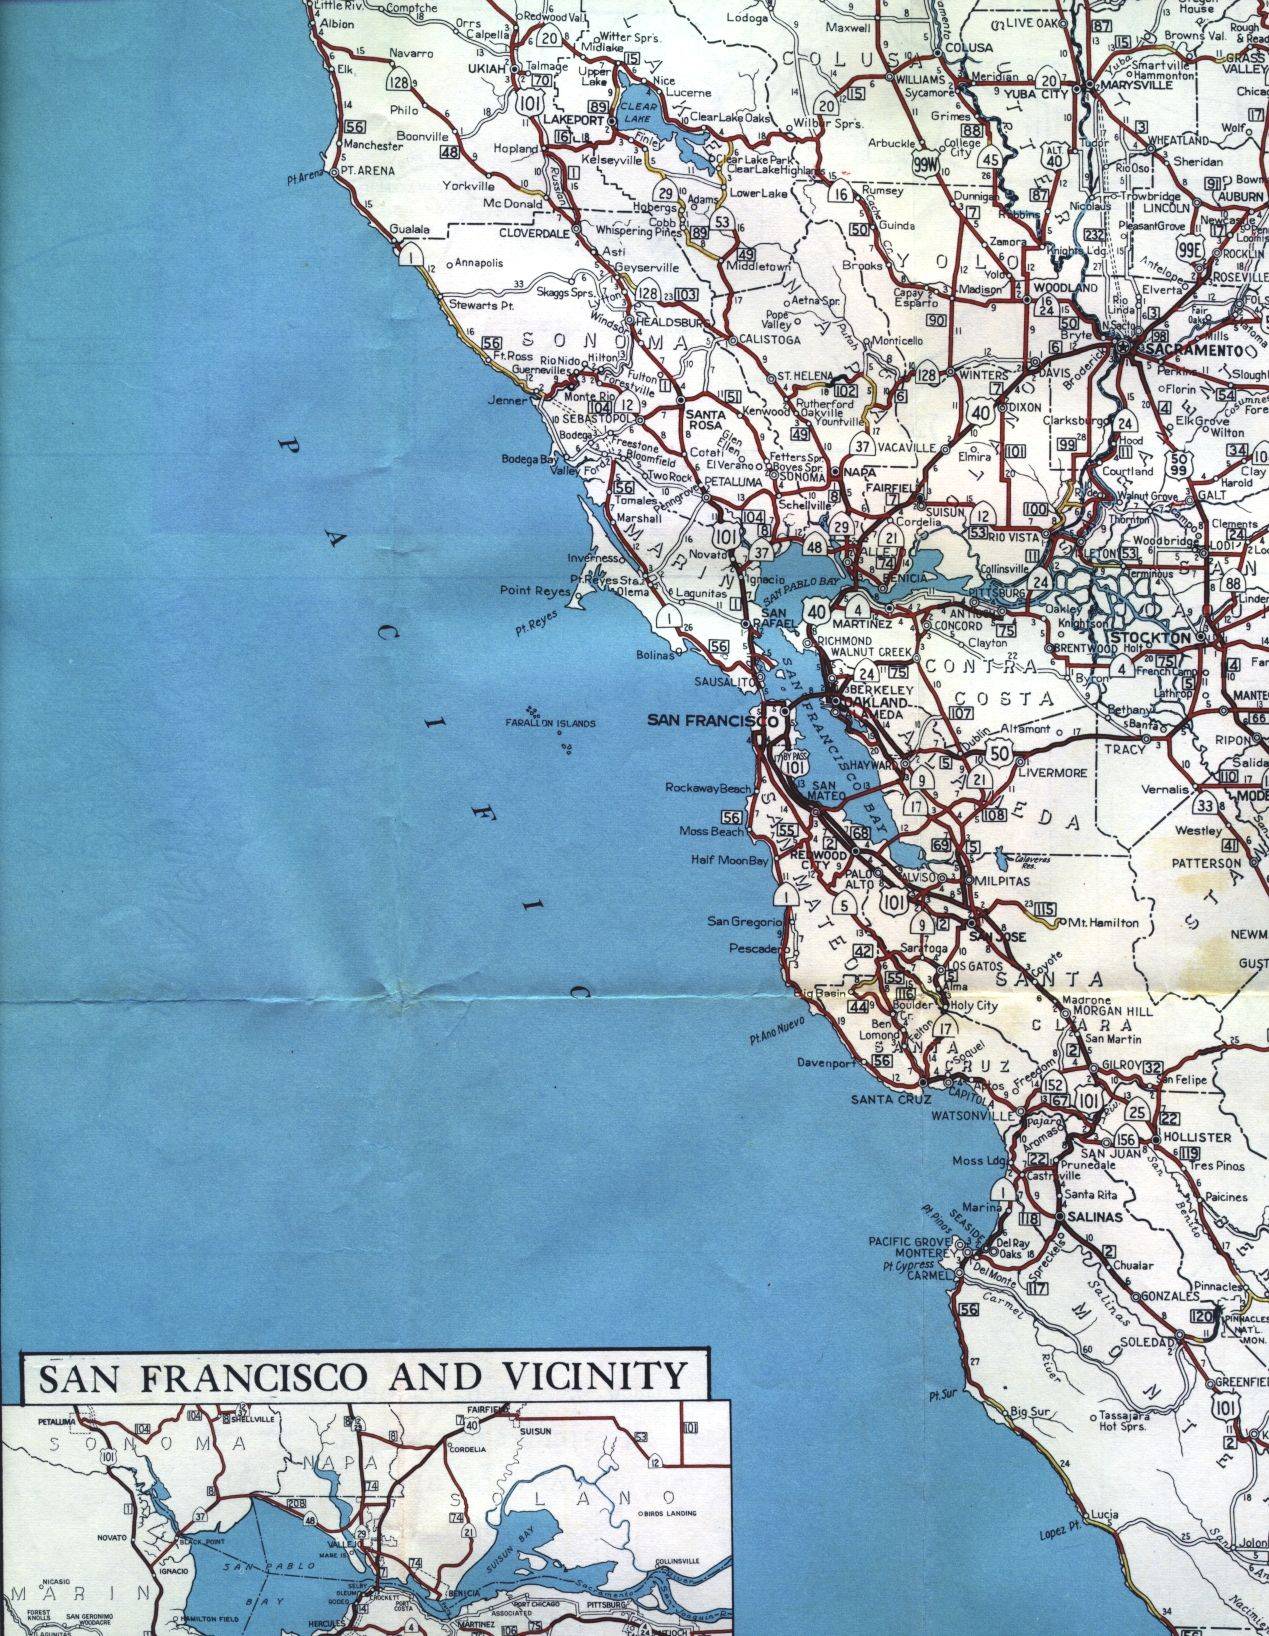 Section of 1956 official highway map for California